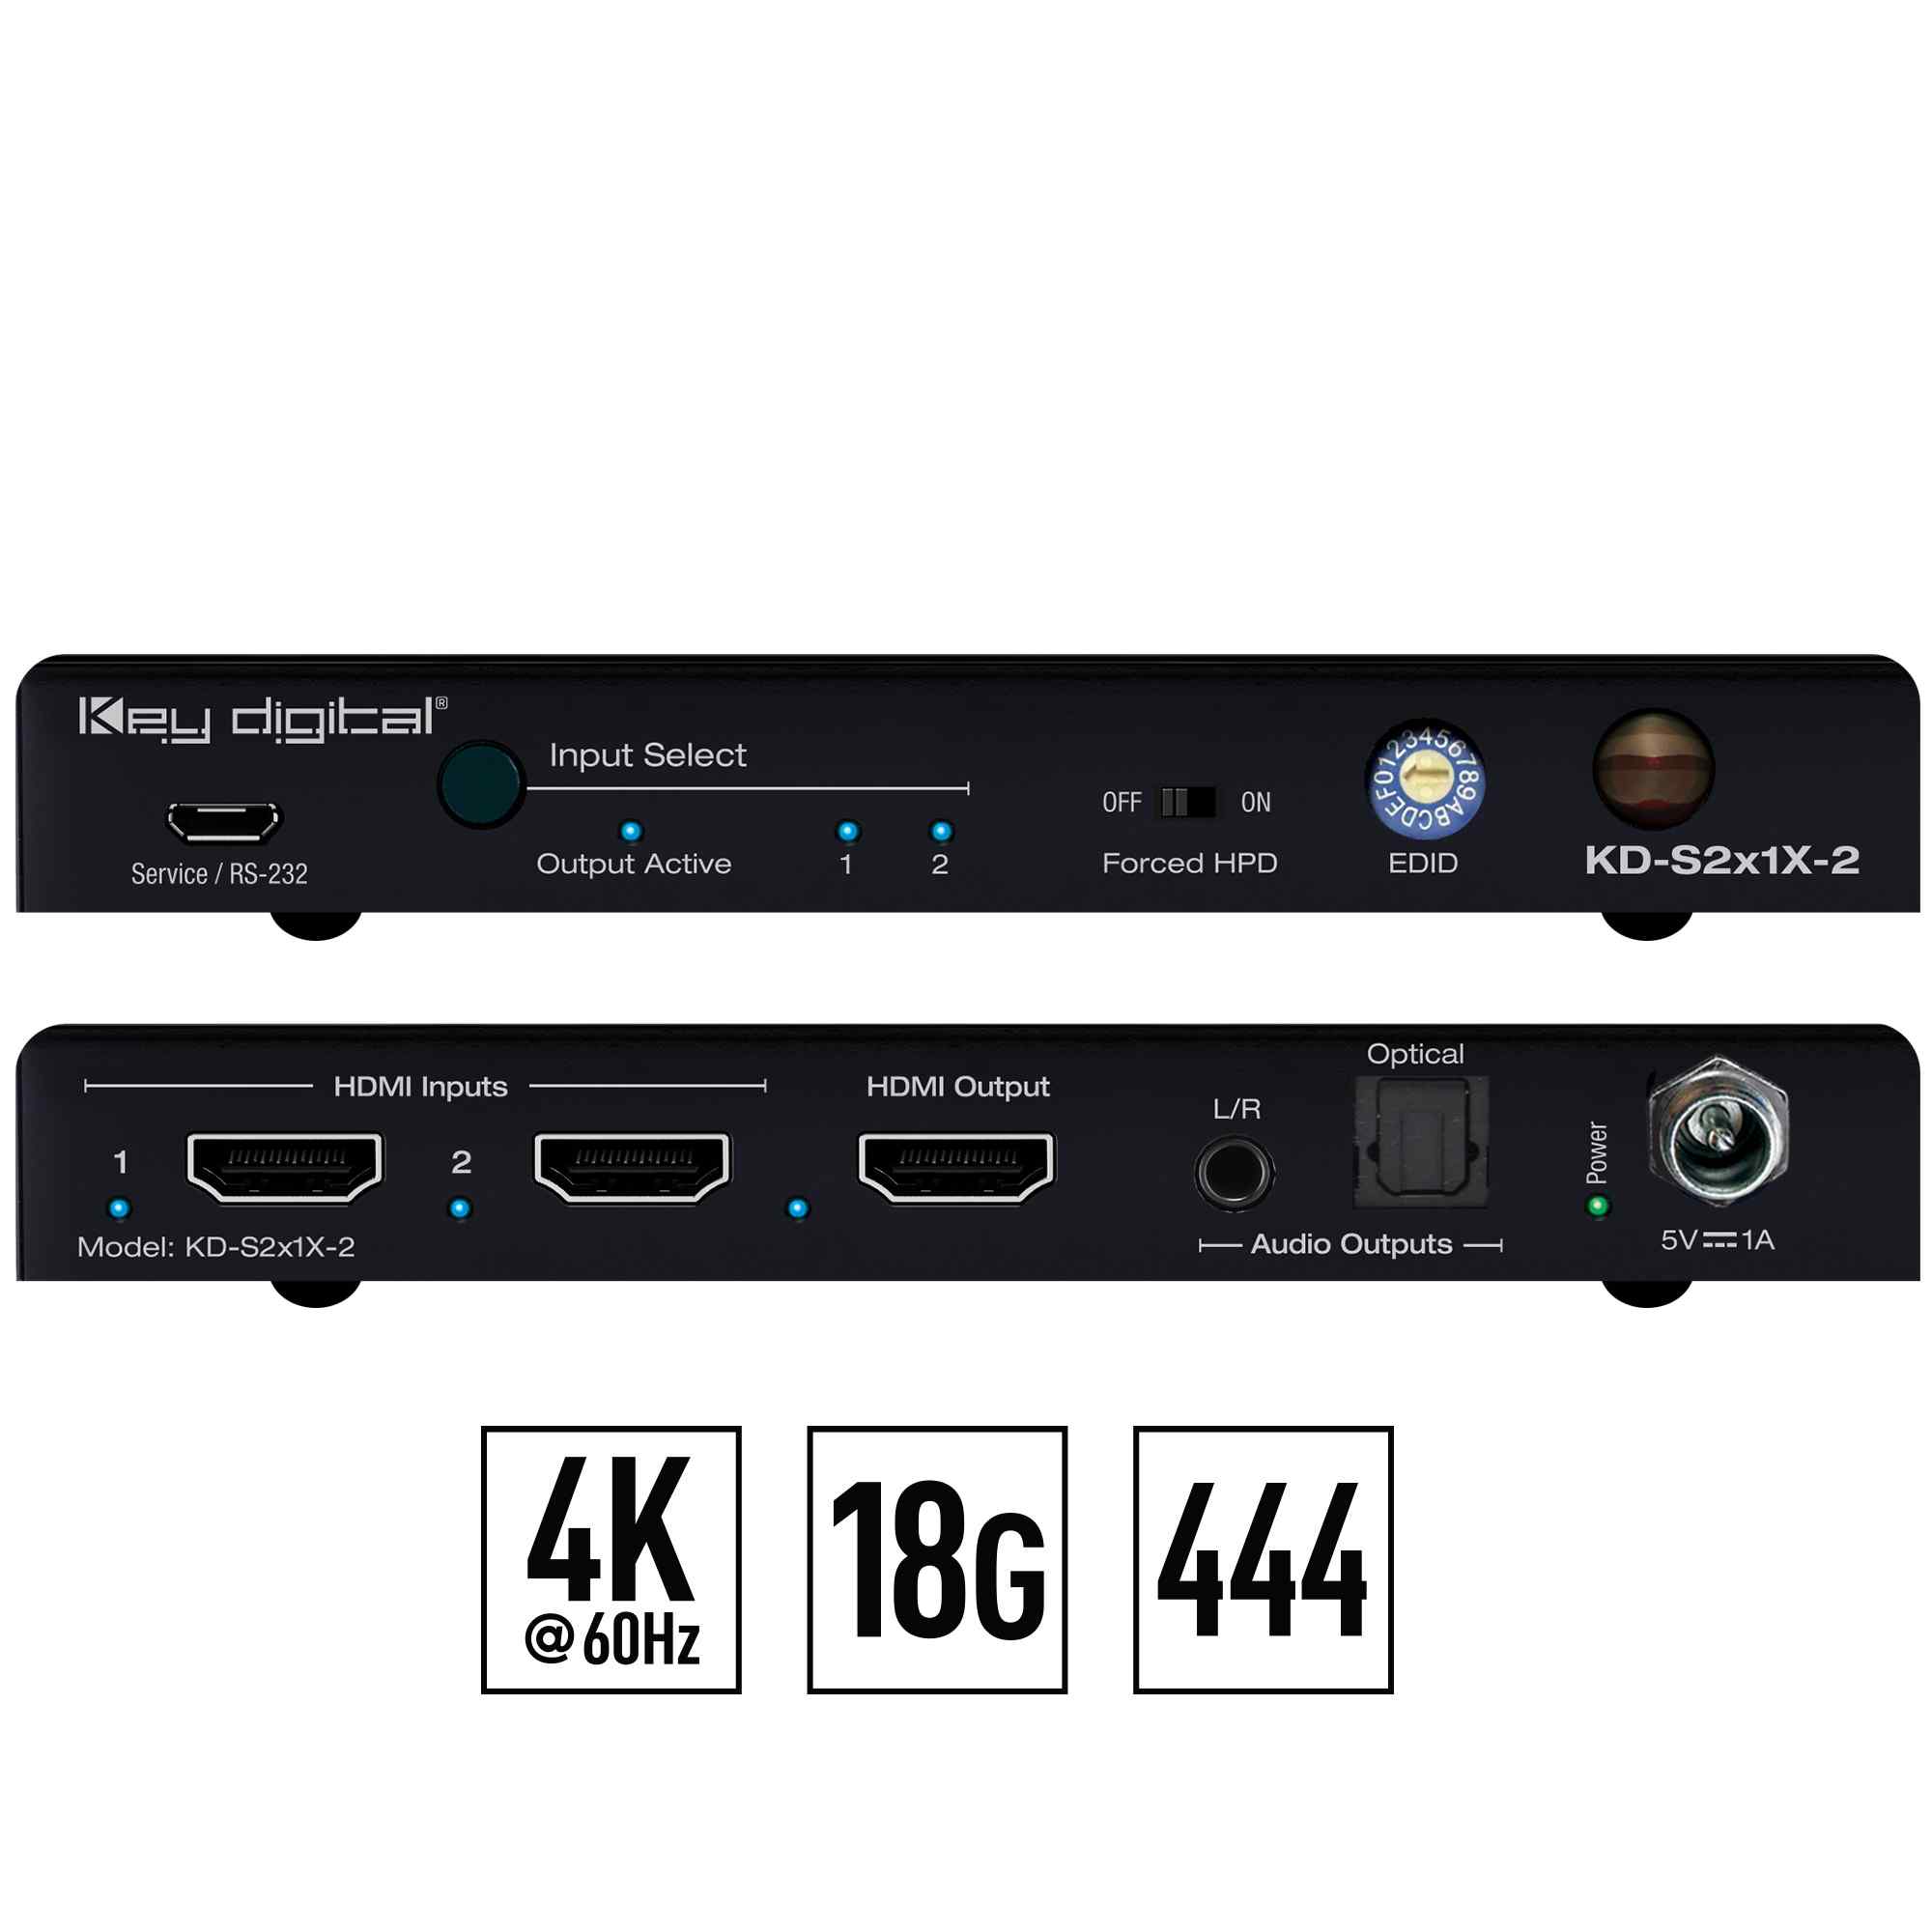 Thumbnail of Key Digital hdmi 2 input 1 output Front and rear View